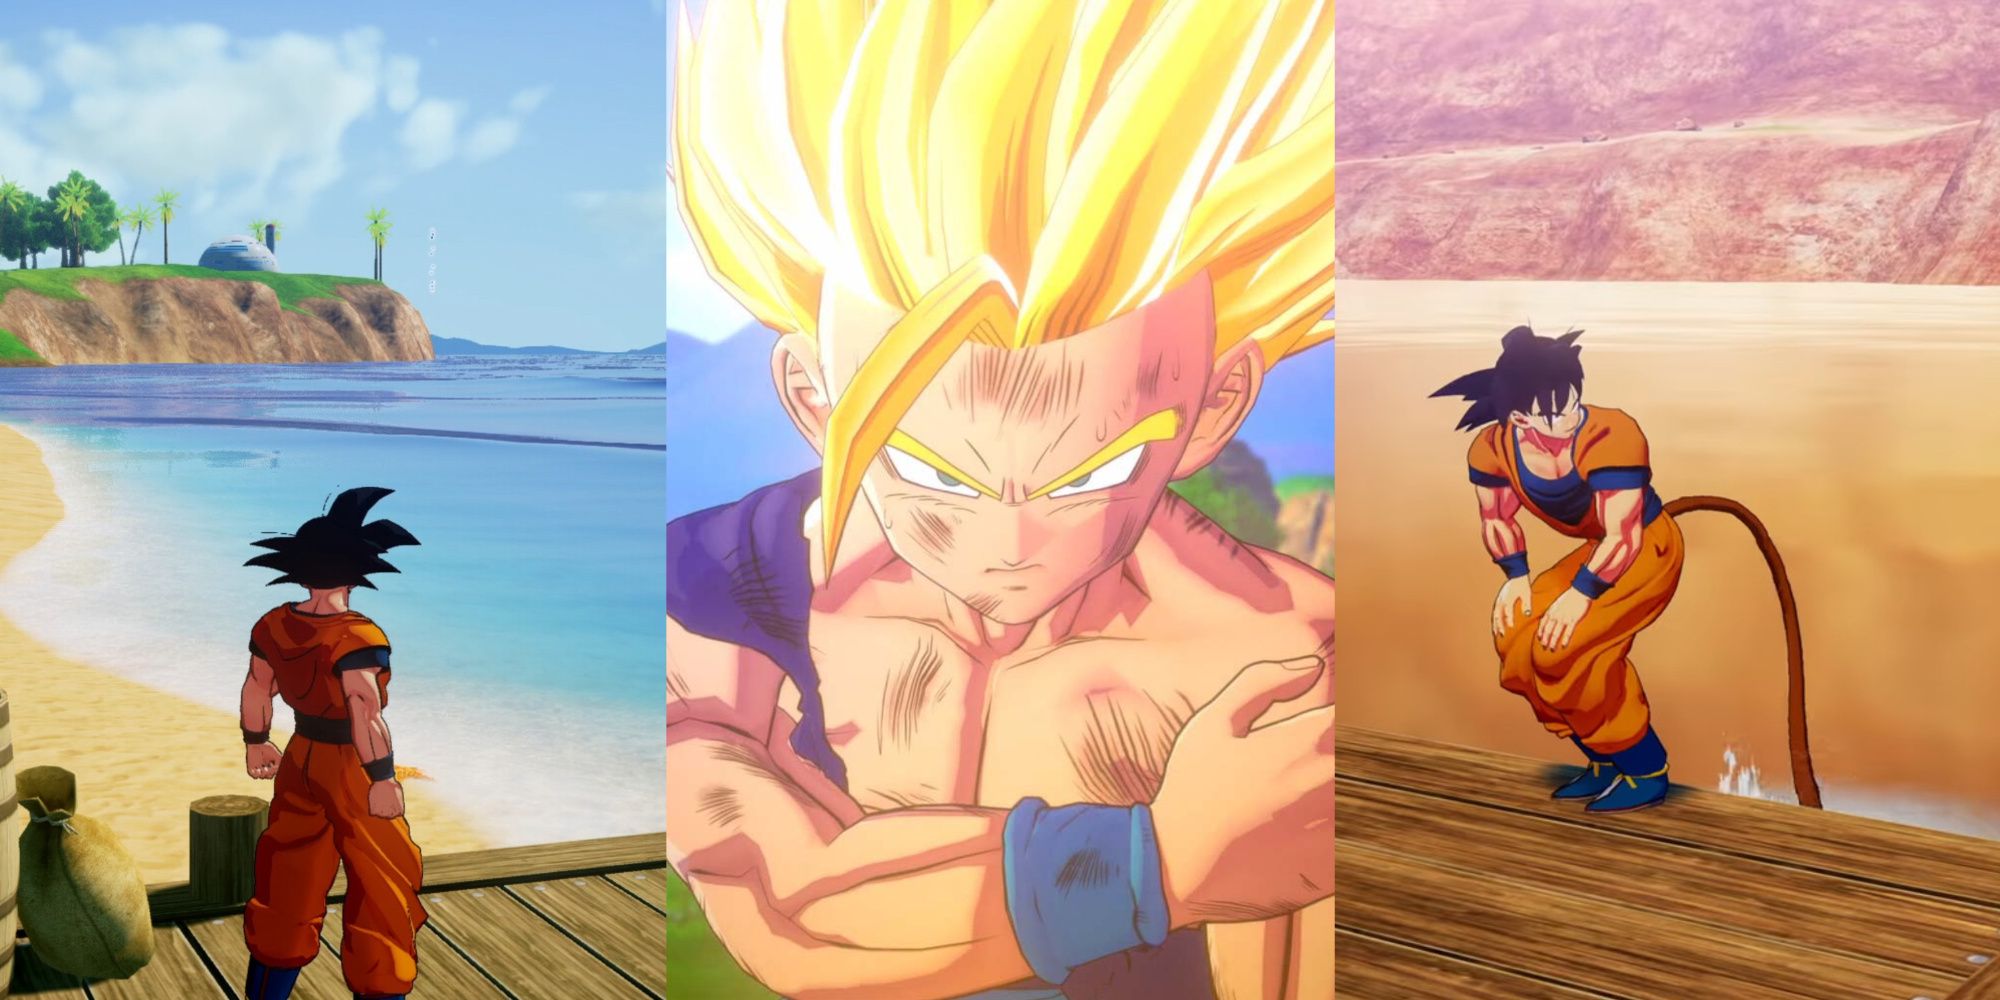 A collage showing Goku looking at the horizon on a beach, Teen Gohan looking at the camera pretty hurt, and Goku using his tail on a lake.